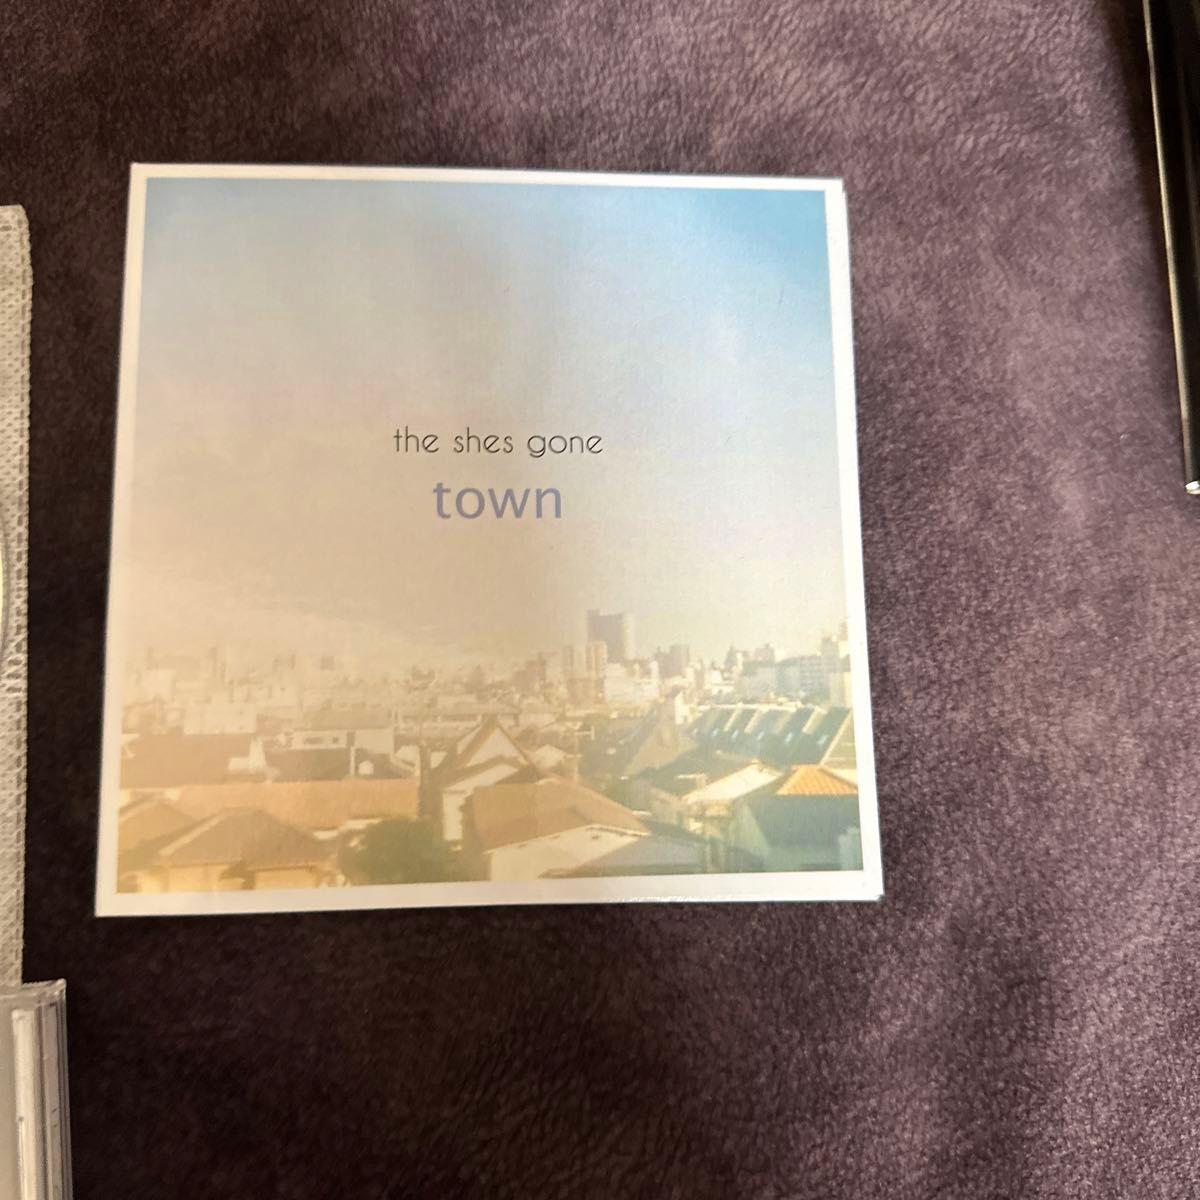 the shes gone/アイビーカラー　邦楽CDまとめ売り